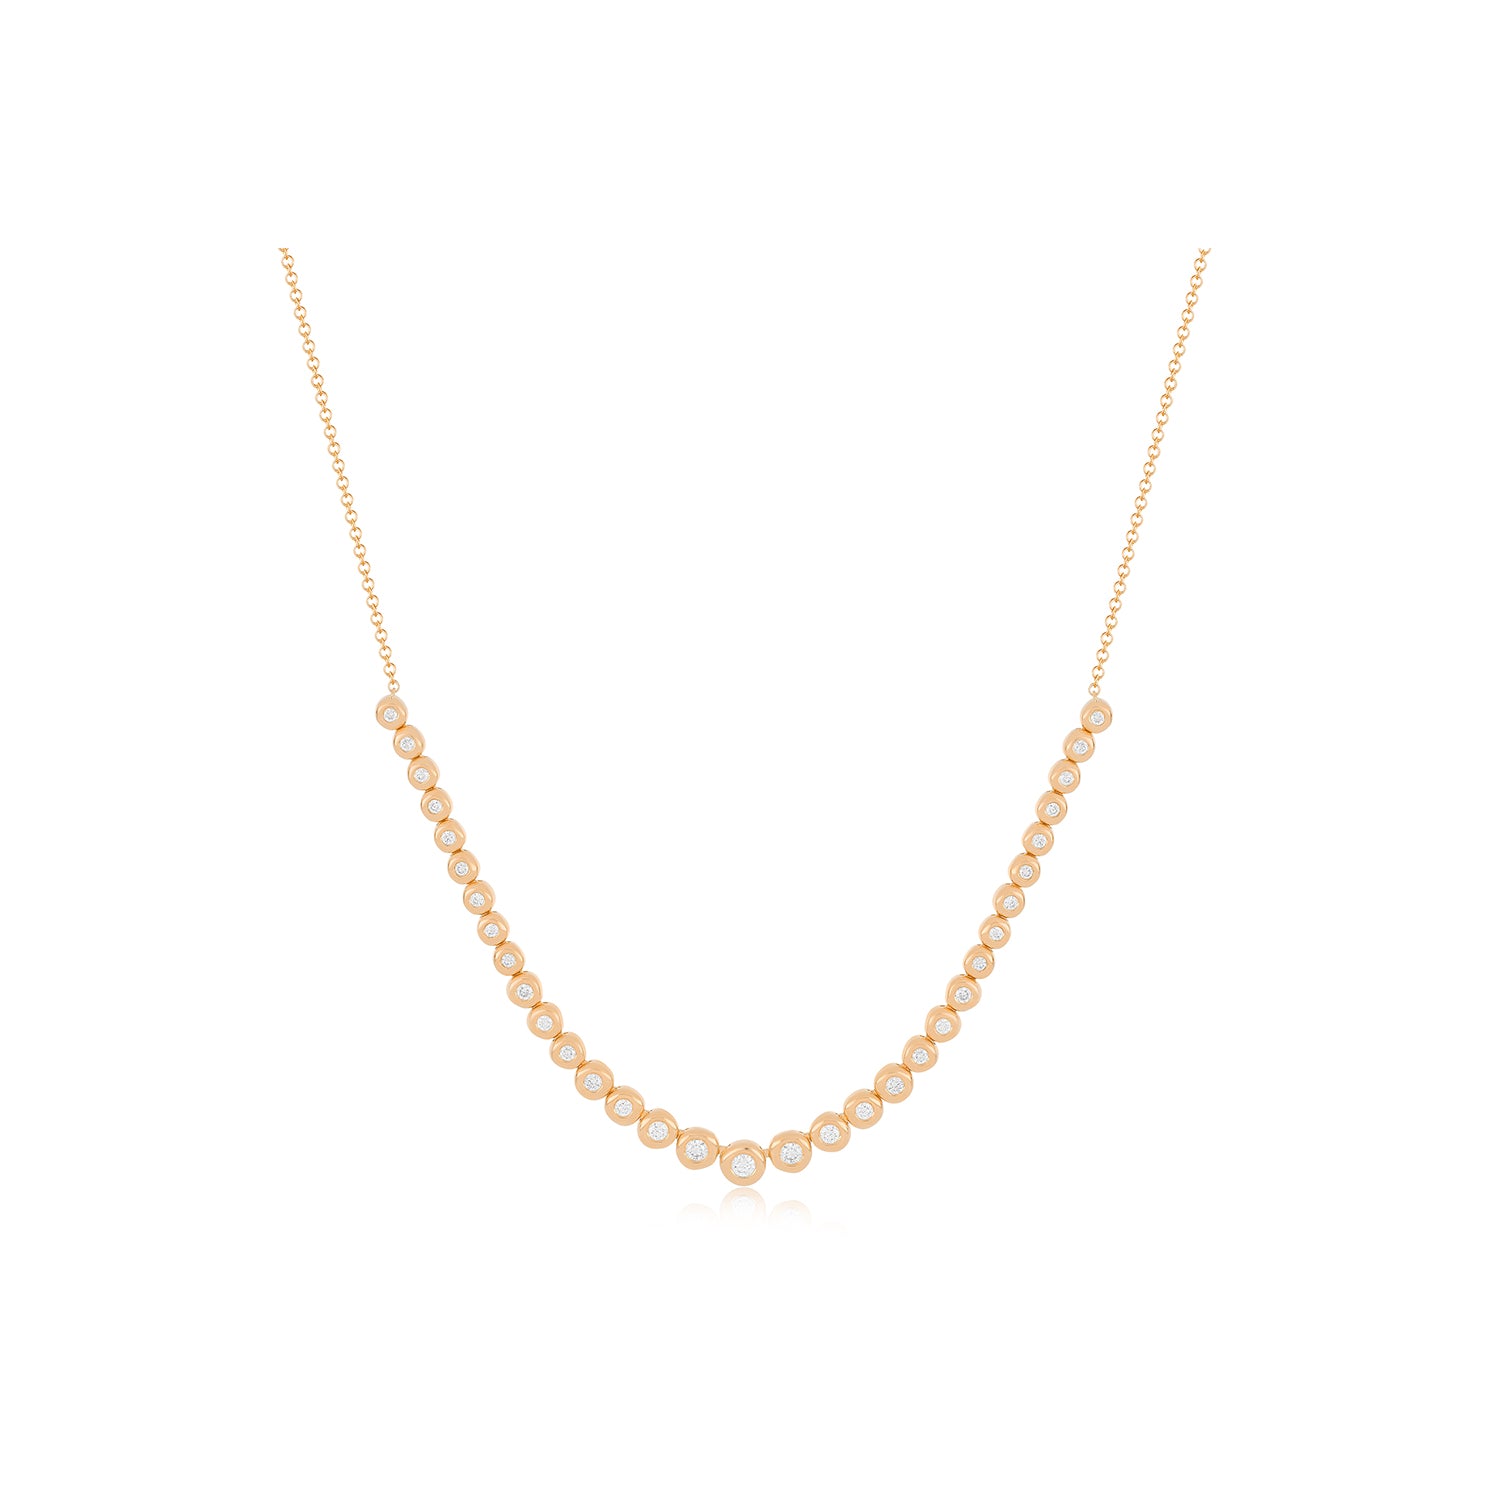 Graduated Diamond Pillow Necklace in 14k rose gold